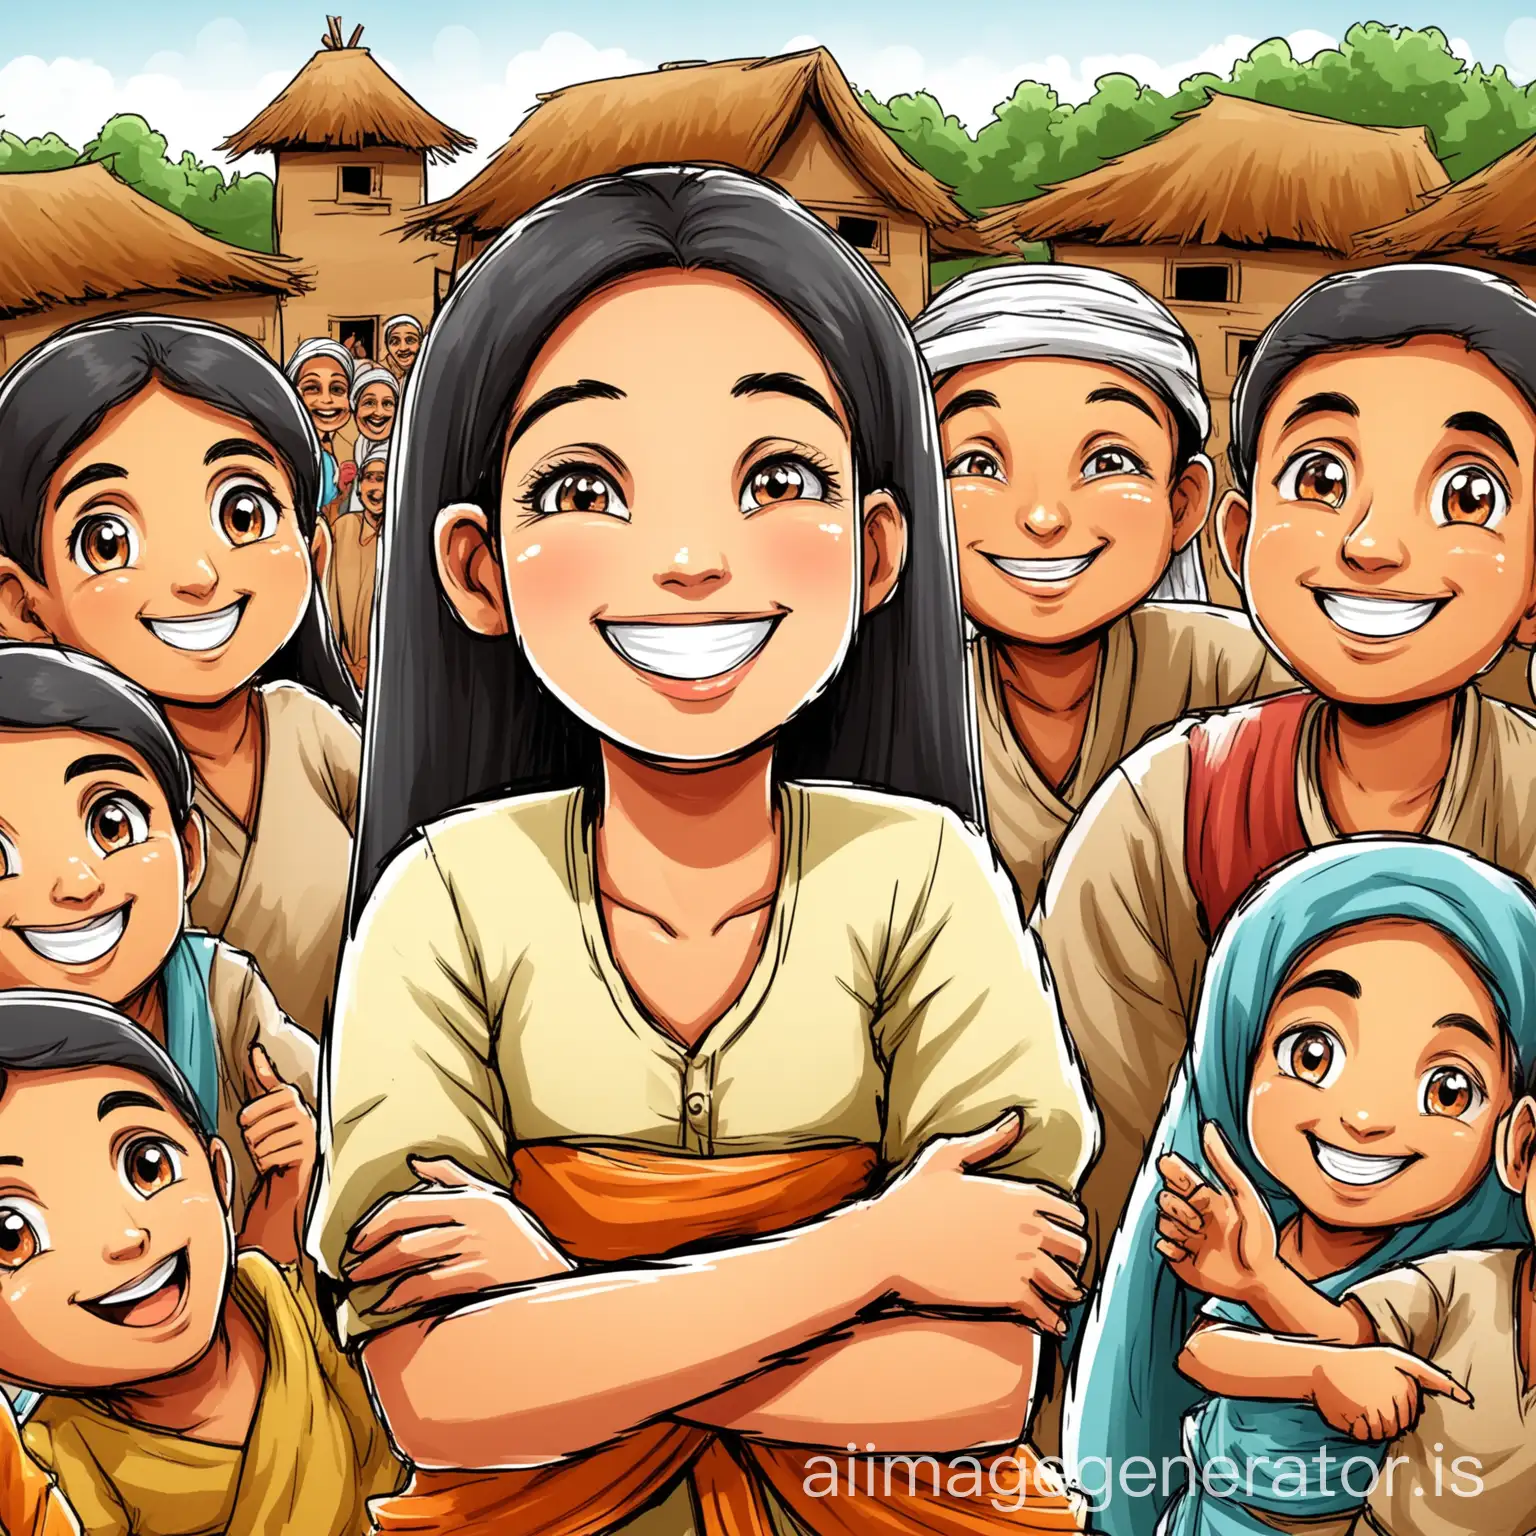 Cheerful-Girl-Smiling-with-Village-Members-in-Gilbil-Style-Cartoon-Drawing